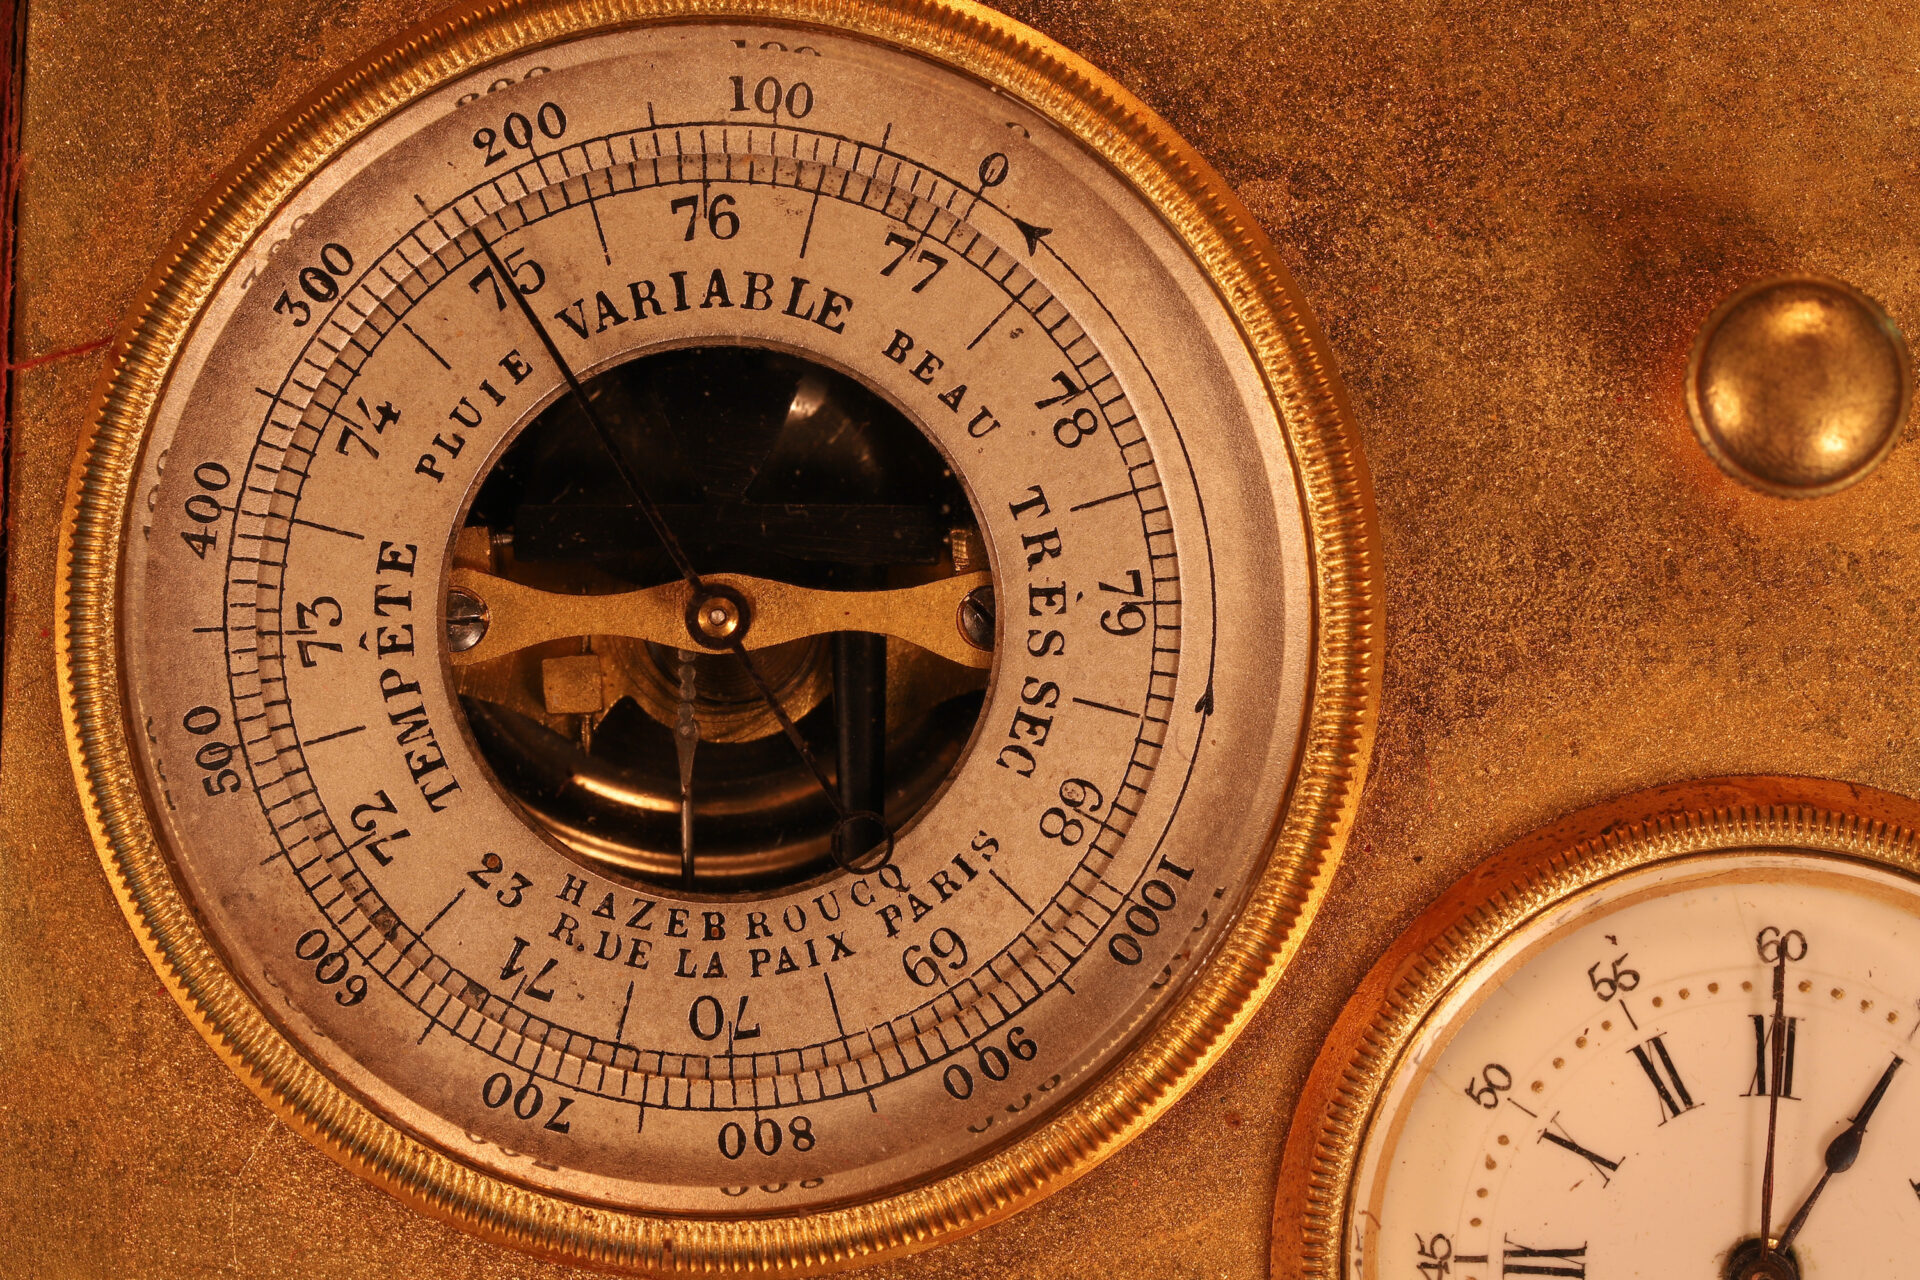 Close up of barometer from French Travel Compendium Retailed by Hazebroucq c1900